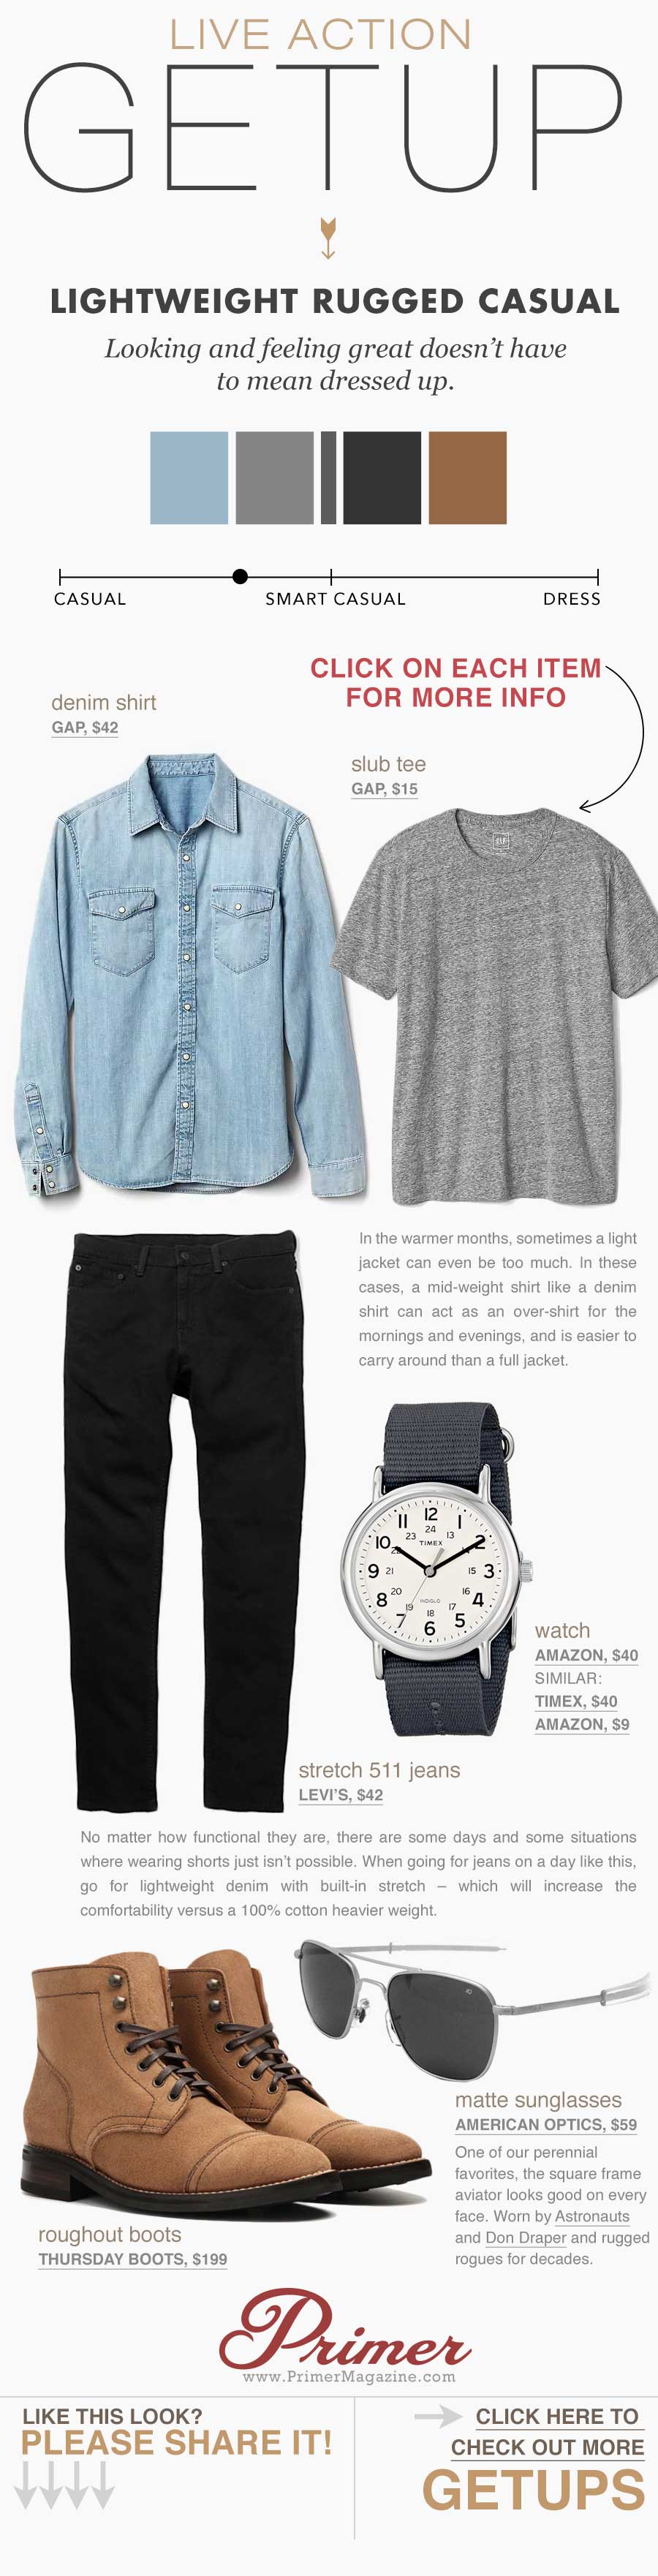 Live Action Getup: Lightweight Rugged Casual men's outfit infographic with denim shirt, jeans, and suede boots